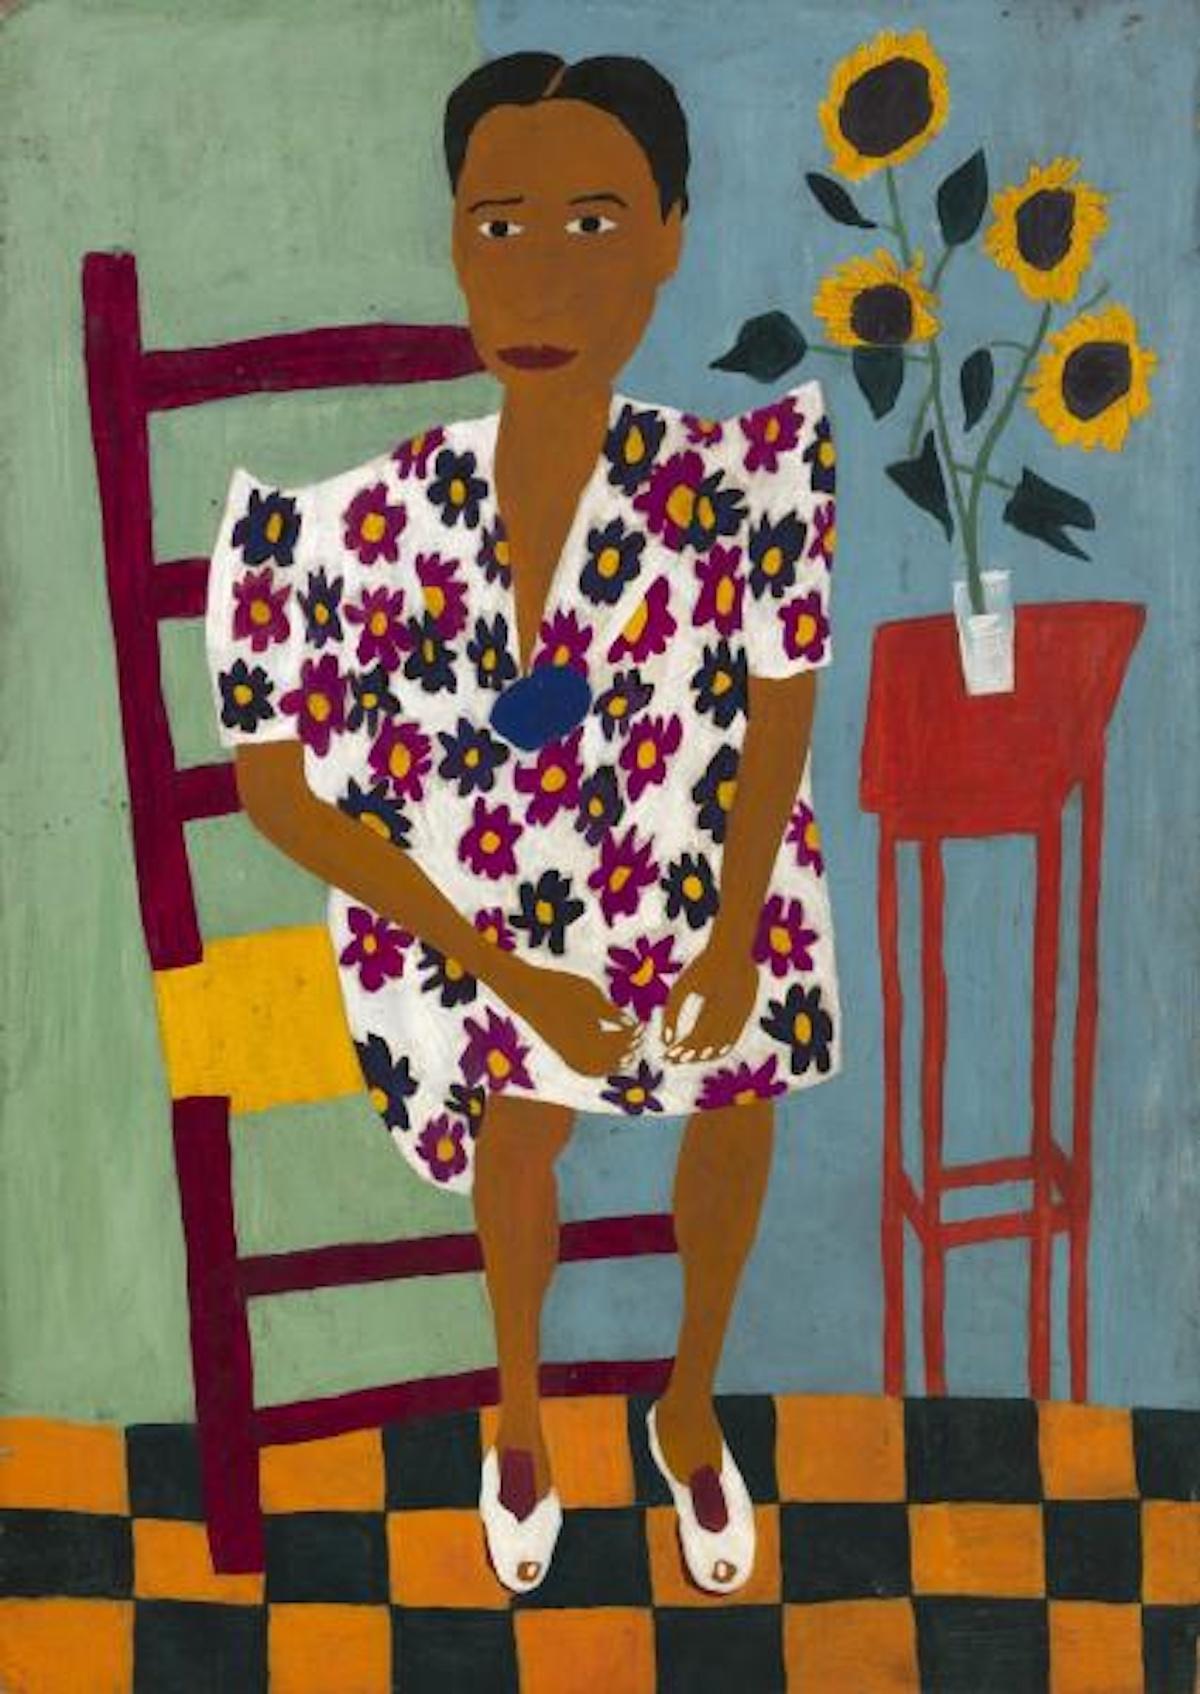 William H. Johnson, Portrait with Sunflowers, 1944. Oil on paperboard, 31.75 x 22.5 in. (80.8 x 57.2 cm.), Smithsonian American Art Museum, Gift of the Harmon Foundation, Washington, D.C. 